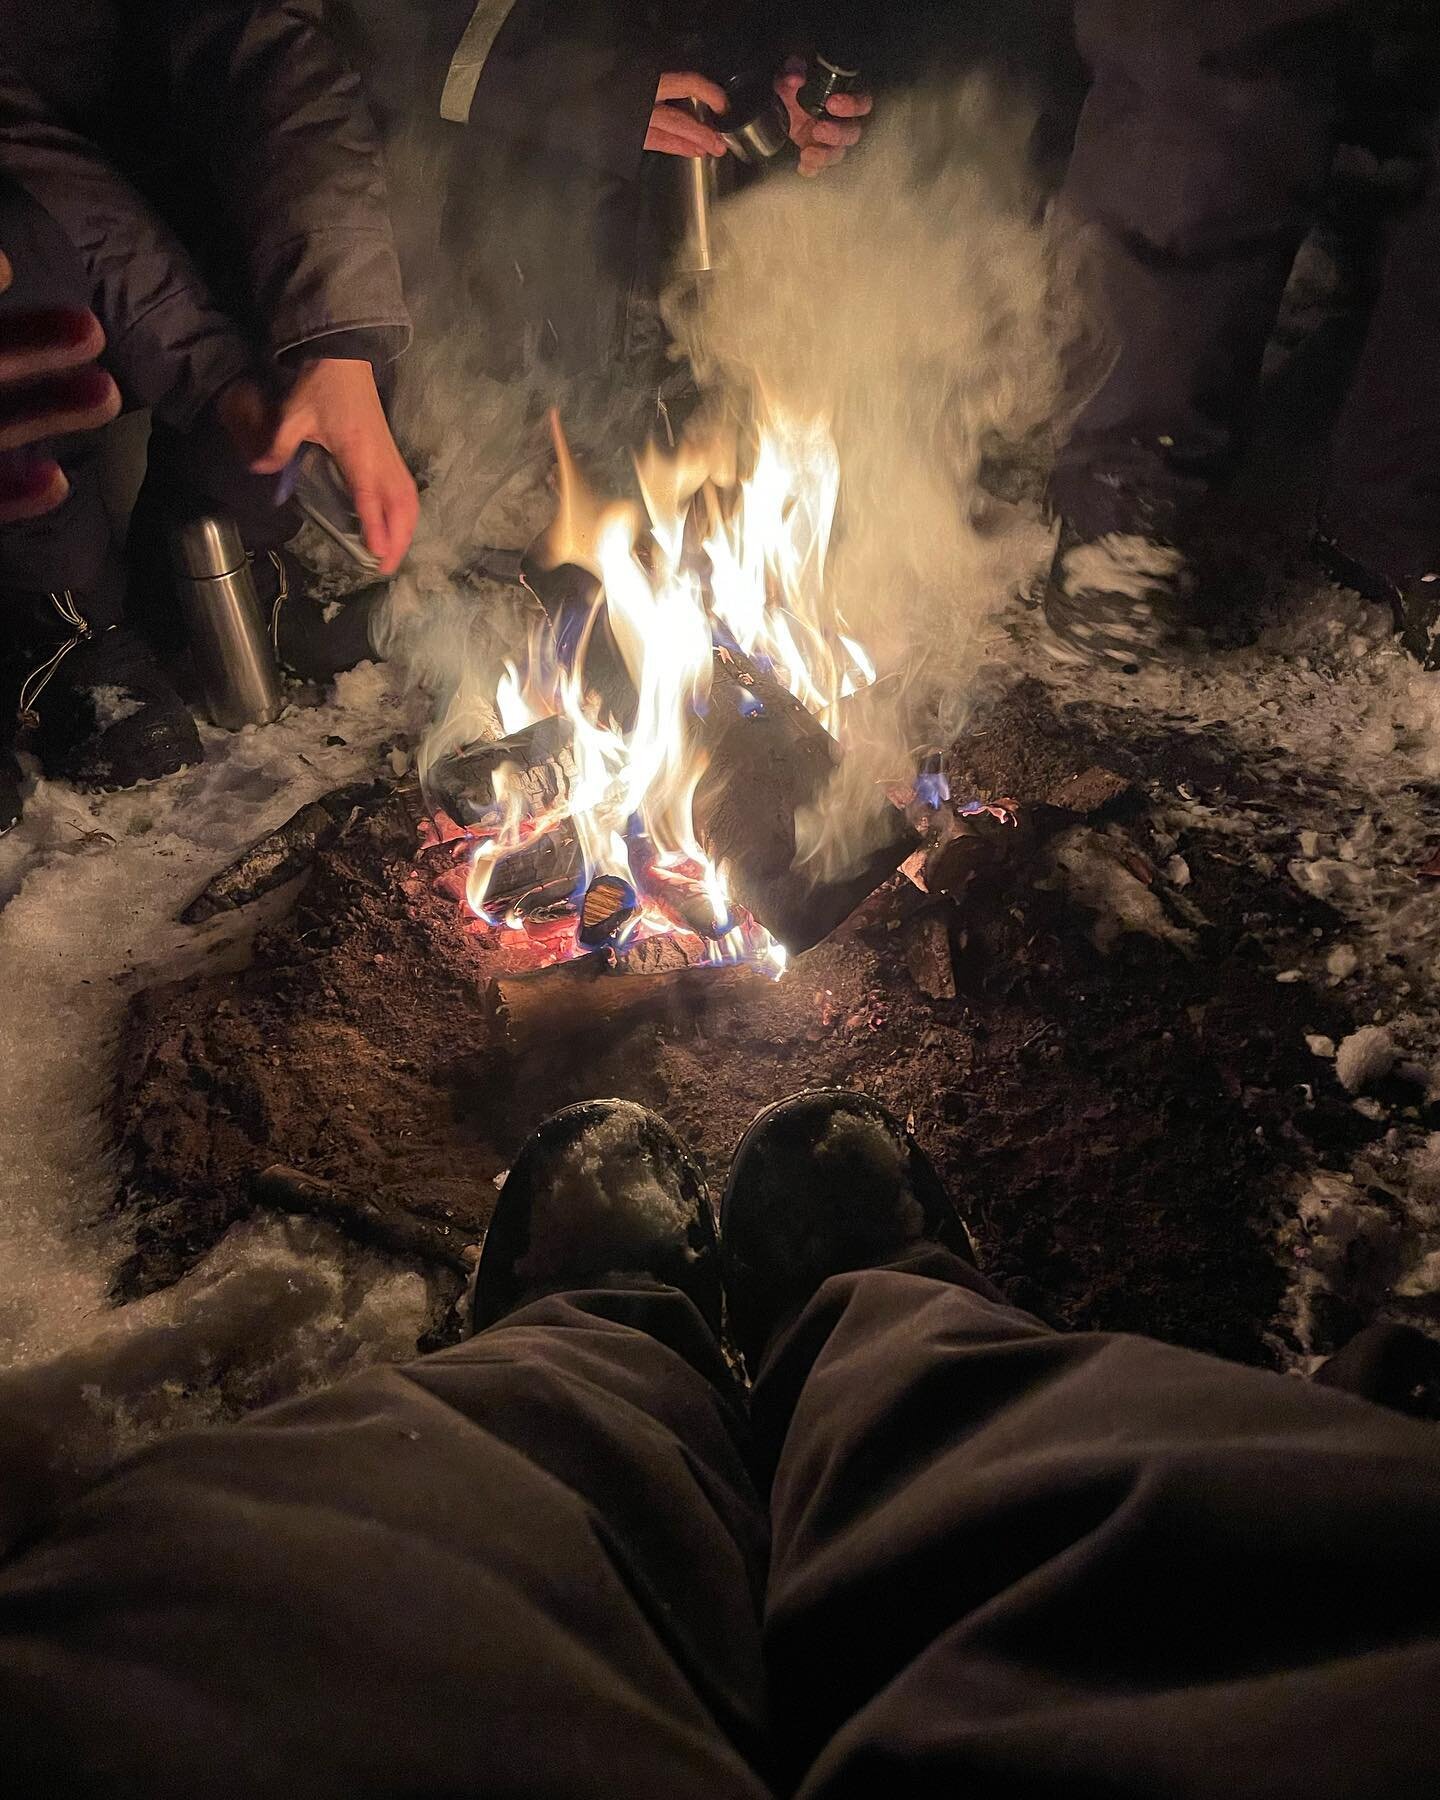 Live update! Currently sitting fireside waiting for the northern lights to come out to play.